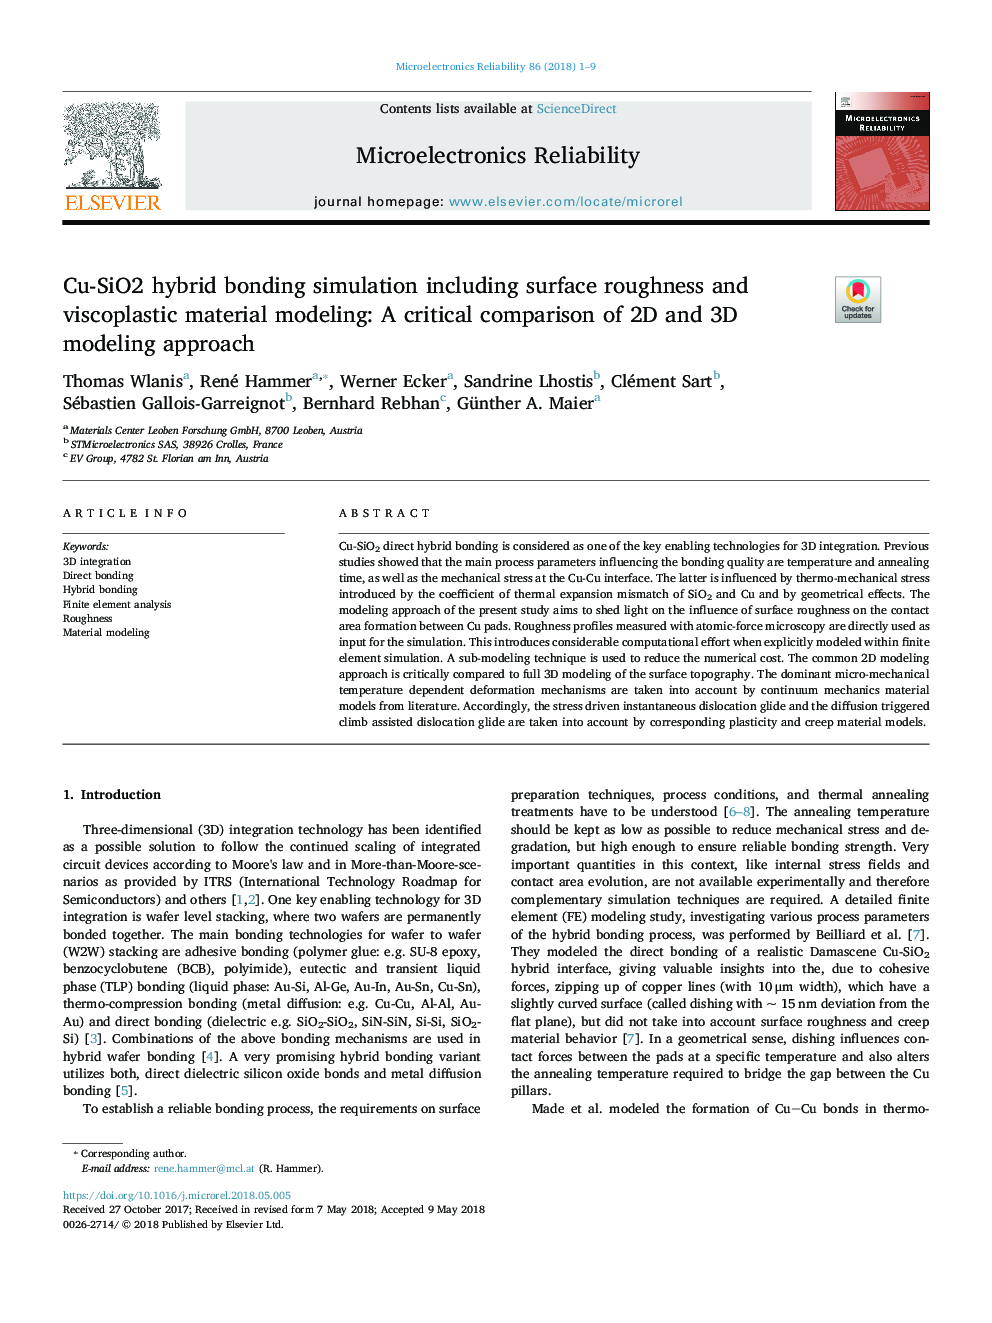 Cu-SiO2 hybrid bonding simulation including surface roughness and viscoplastic material modeling: A critical comparison of 2D and 3D modeling approach